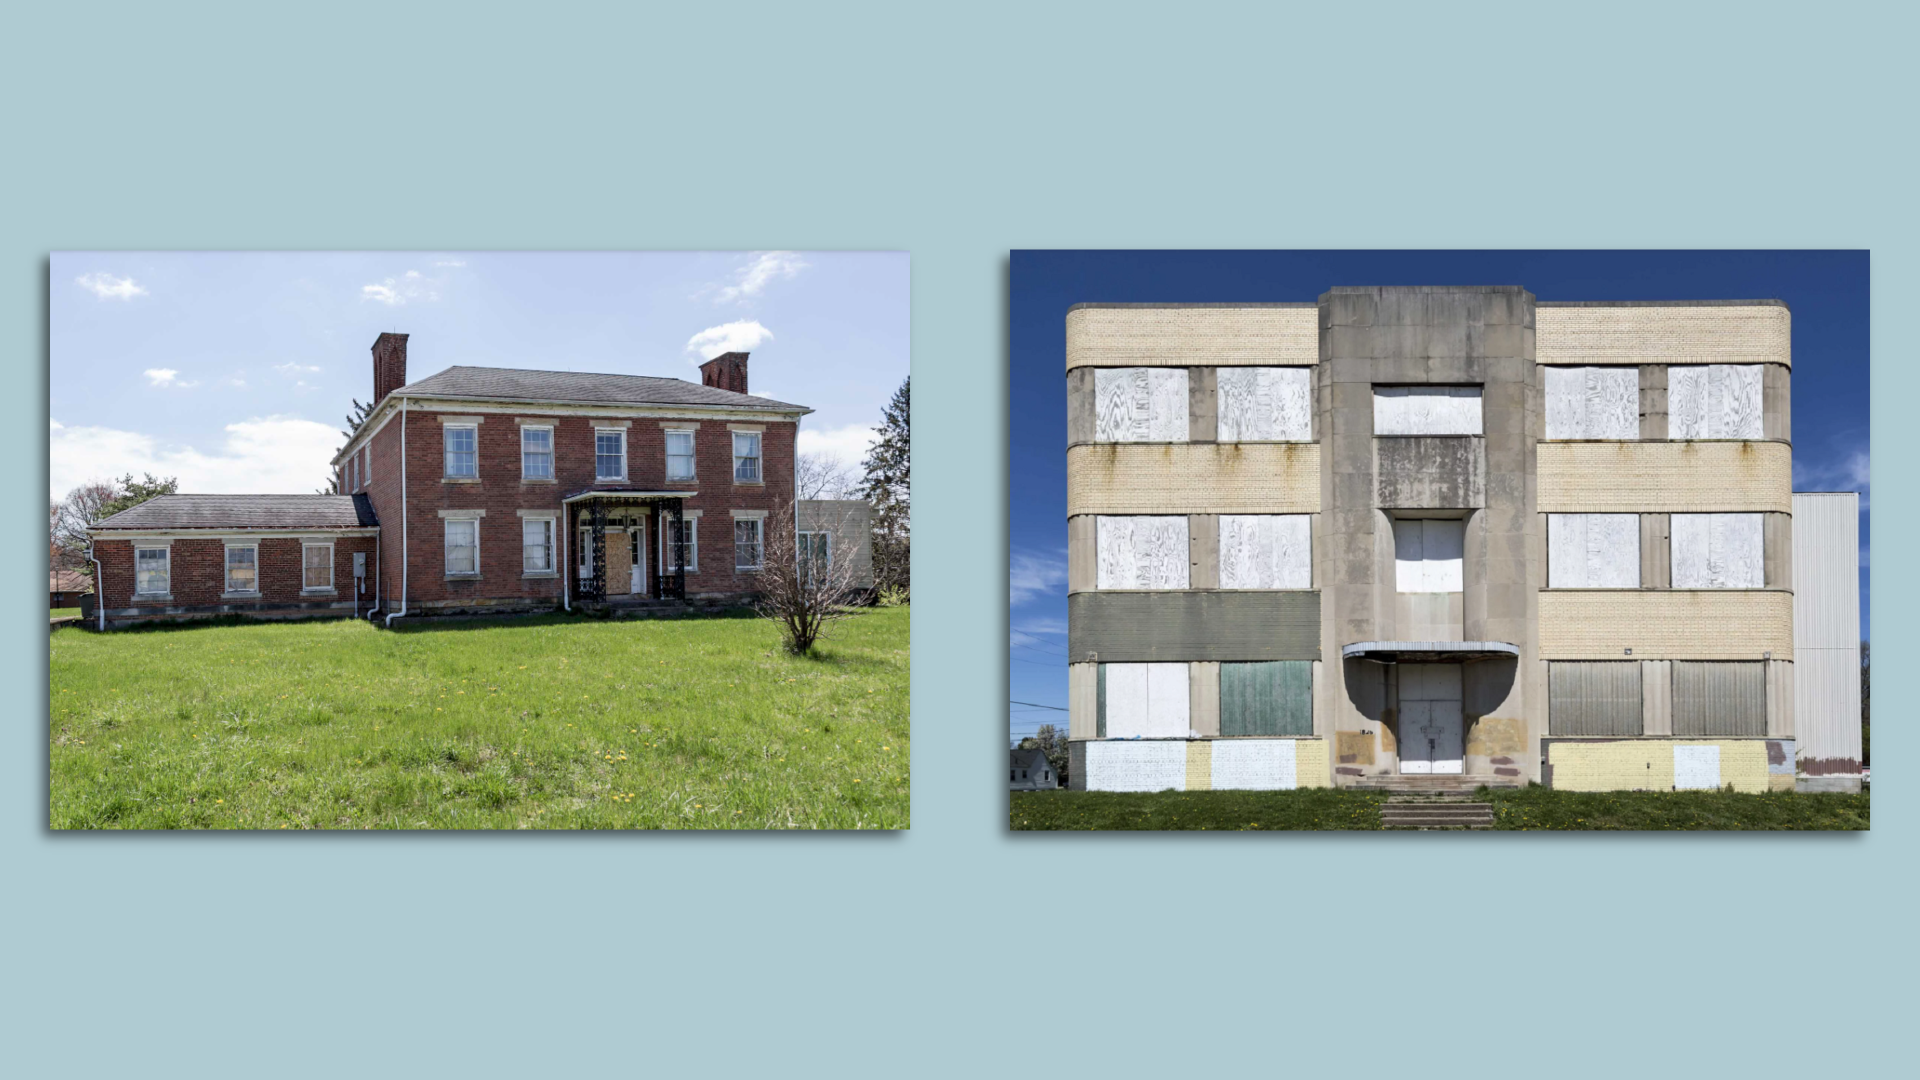 Side-by-side of two abandoned, historic buildings.